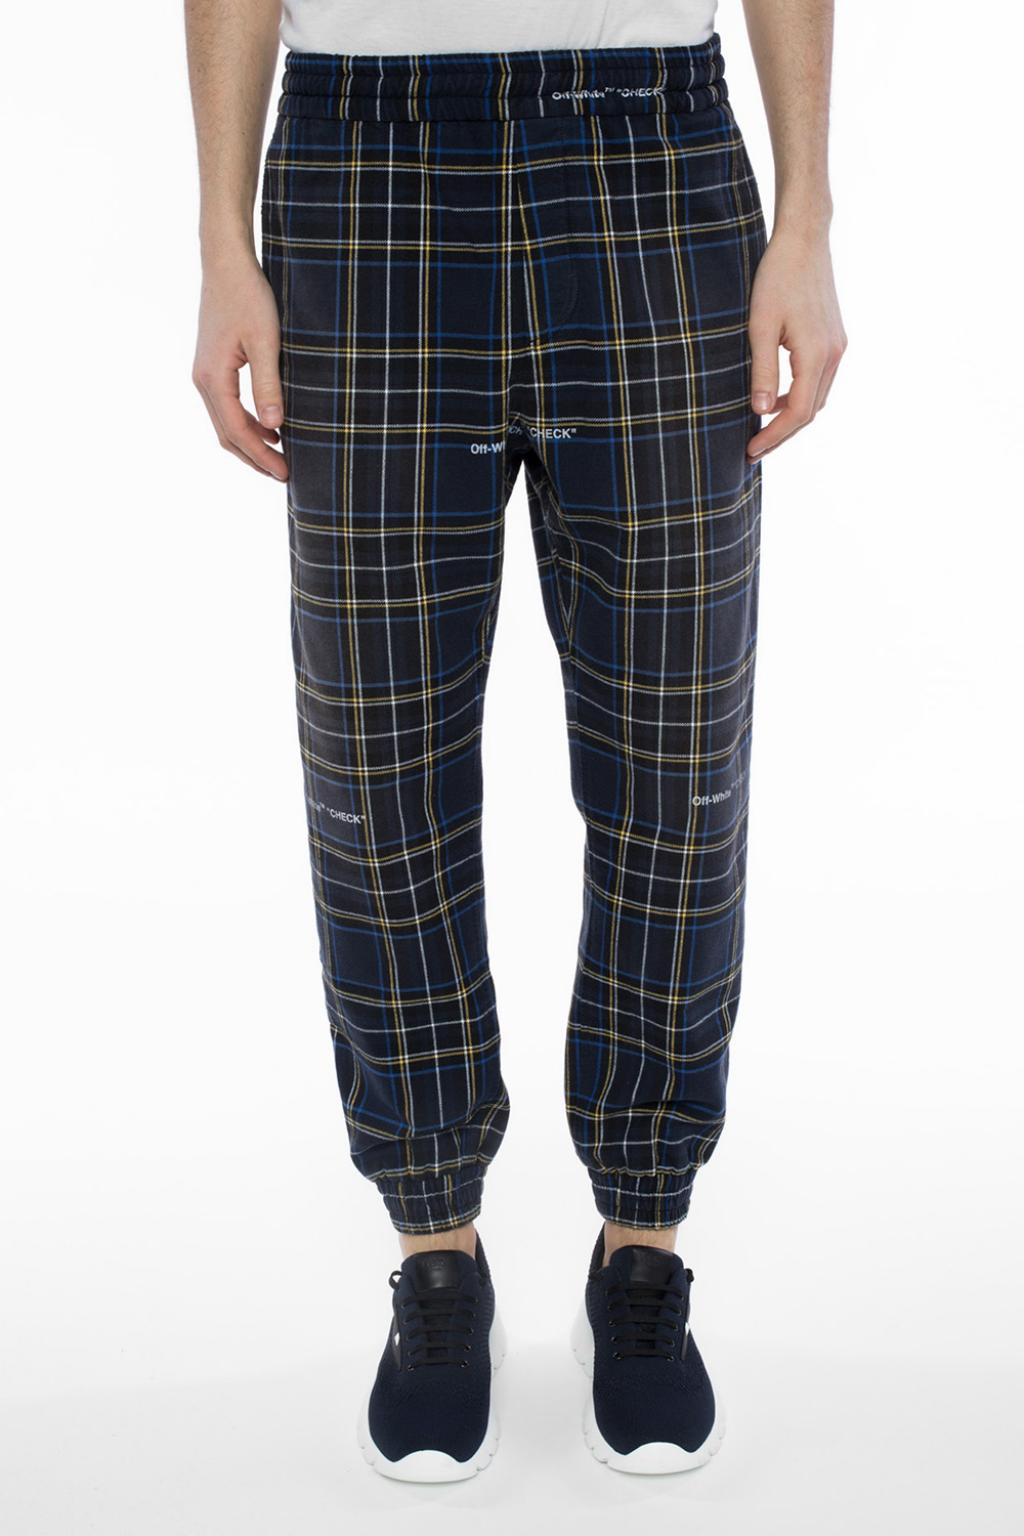 Off-White c/o Virgil Cotton Checked in Blue for Men - Lyst